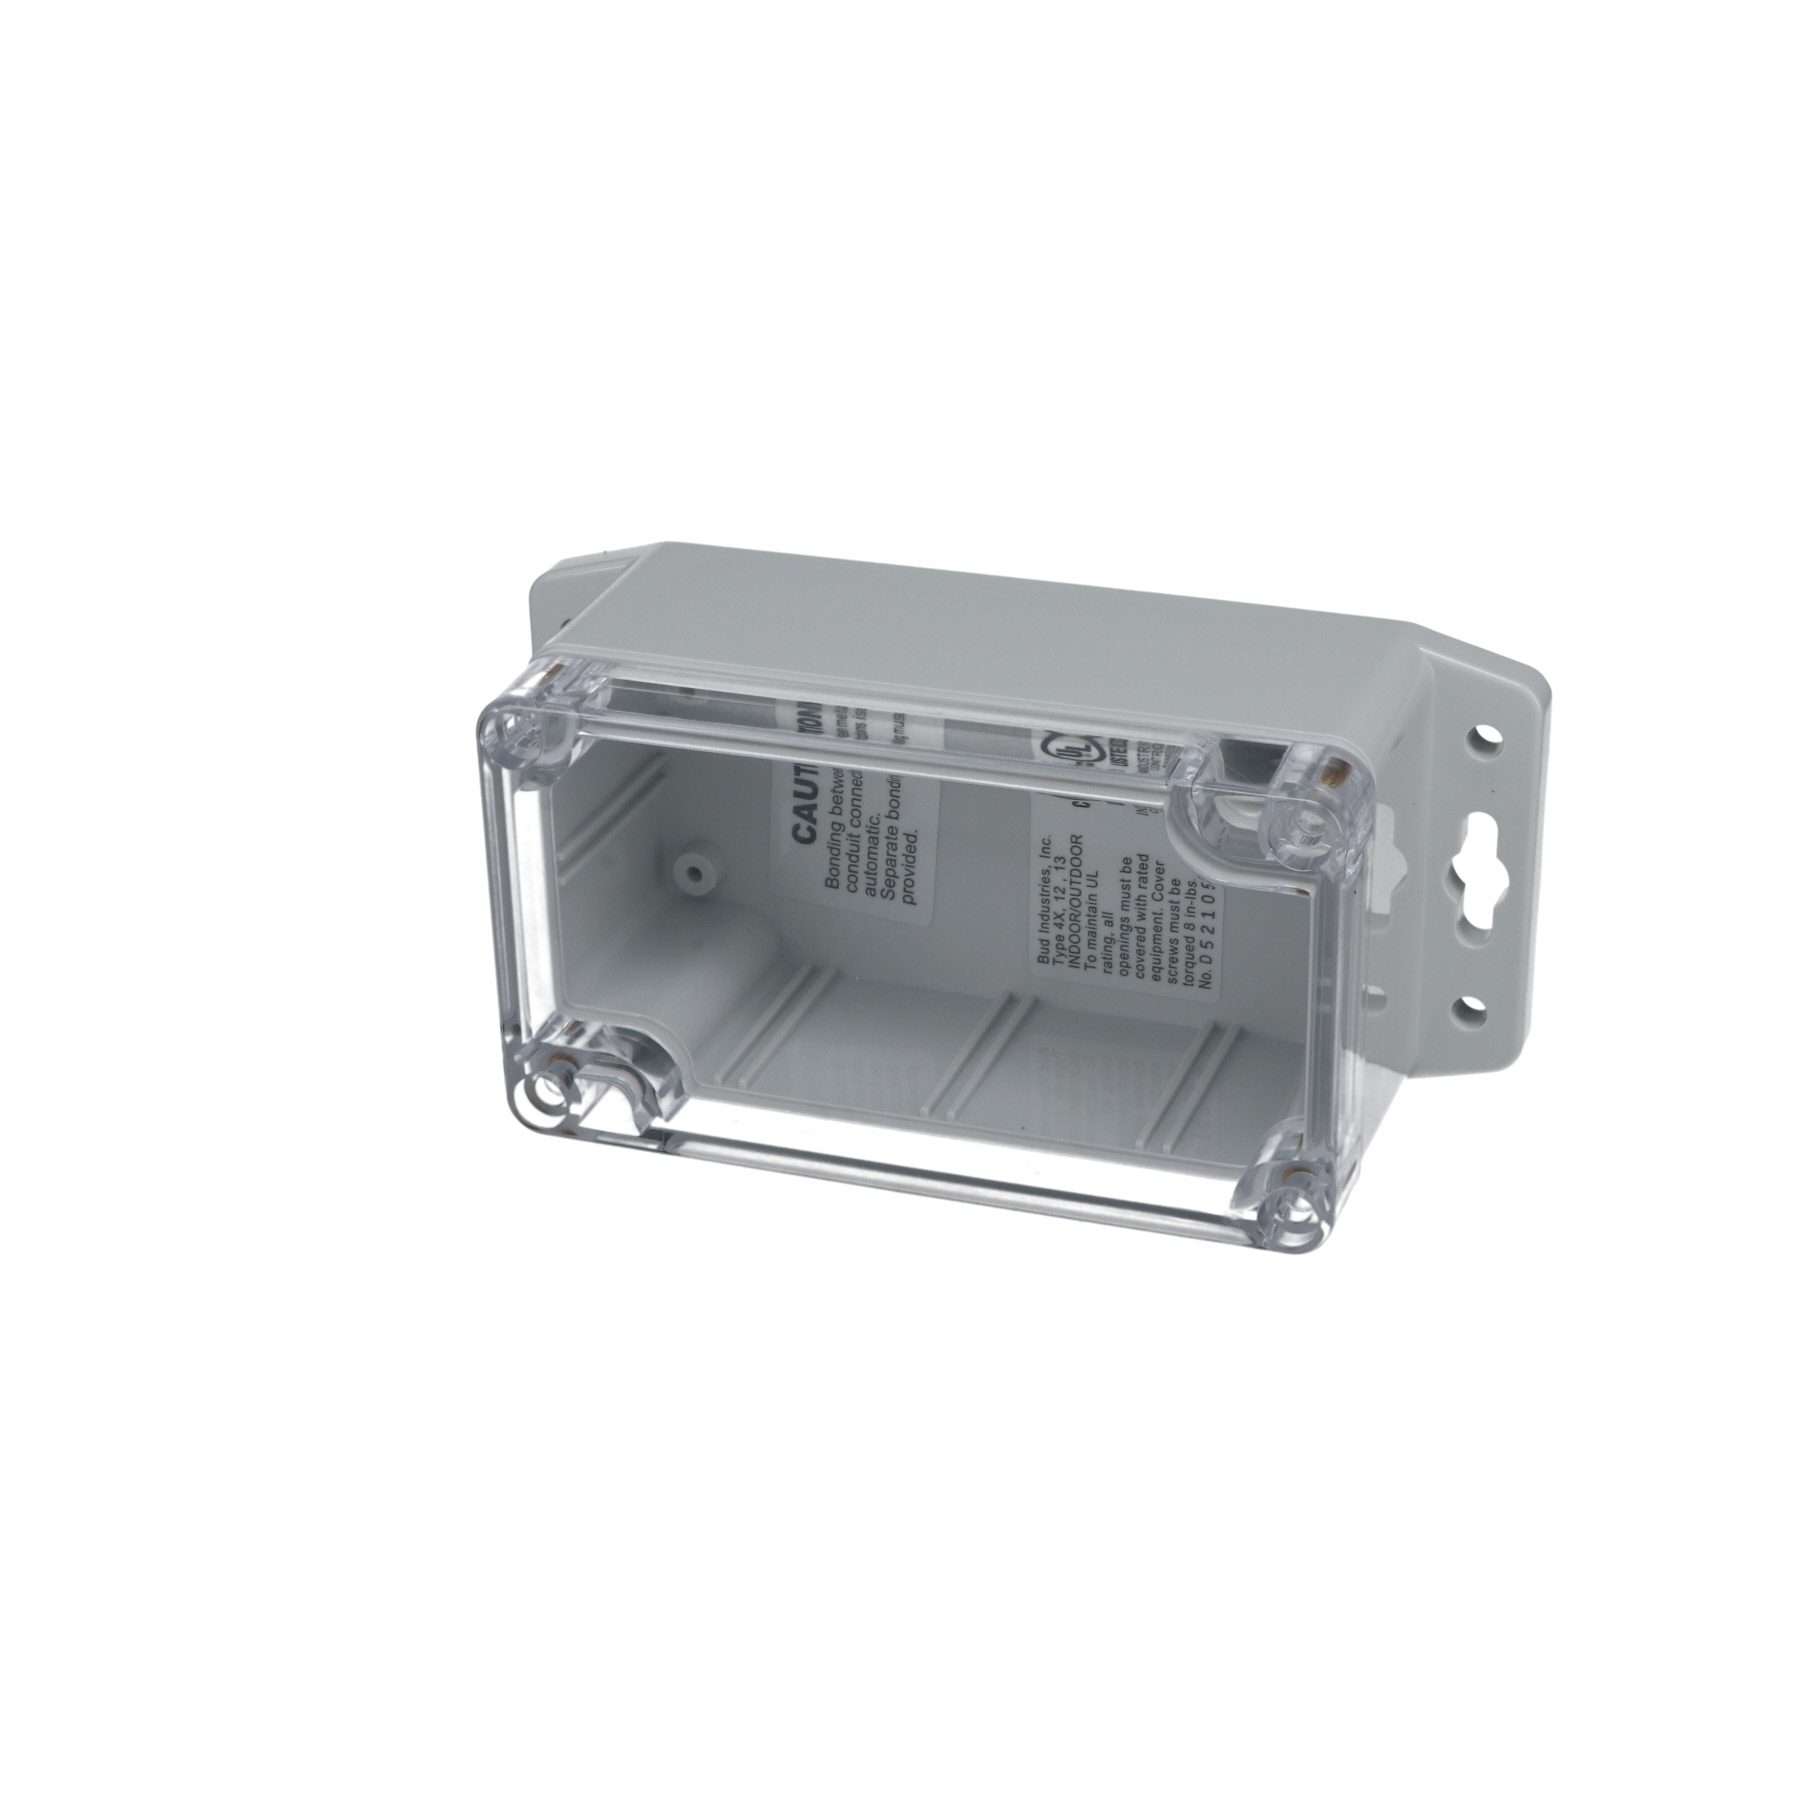 IP65 NEMA 4X Box with Clear Cover and Mounting Brackets PN-1322-CMB